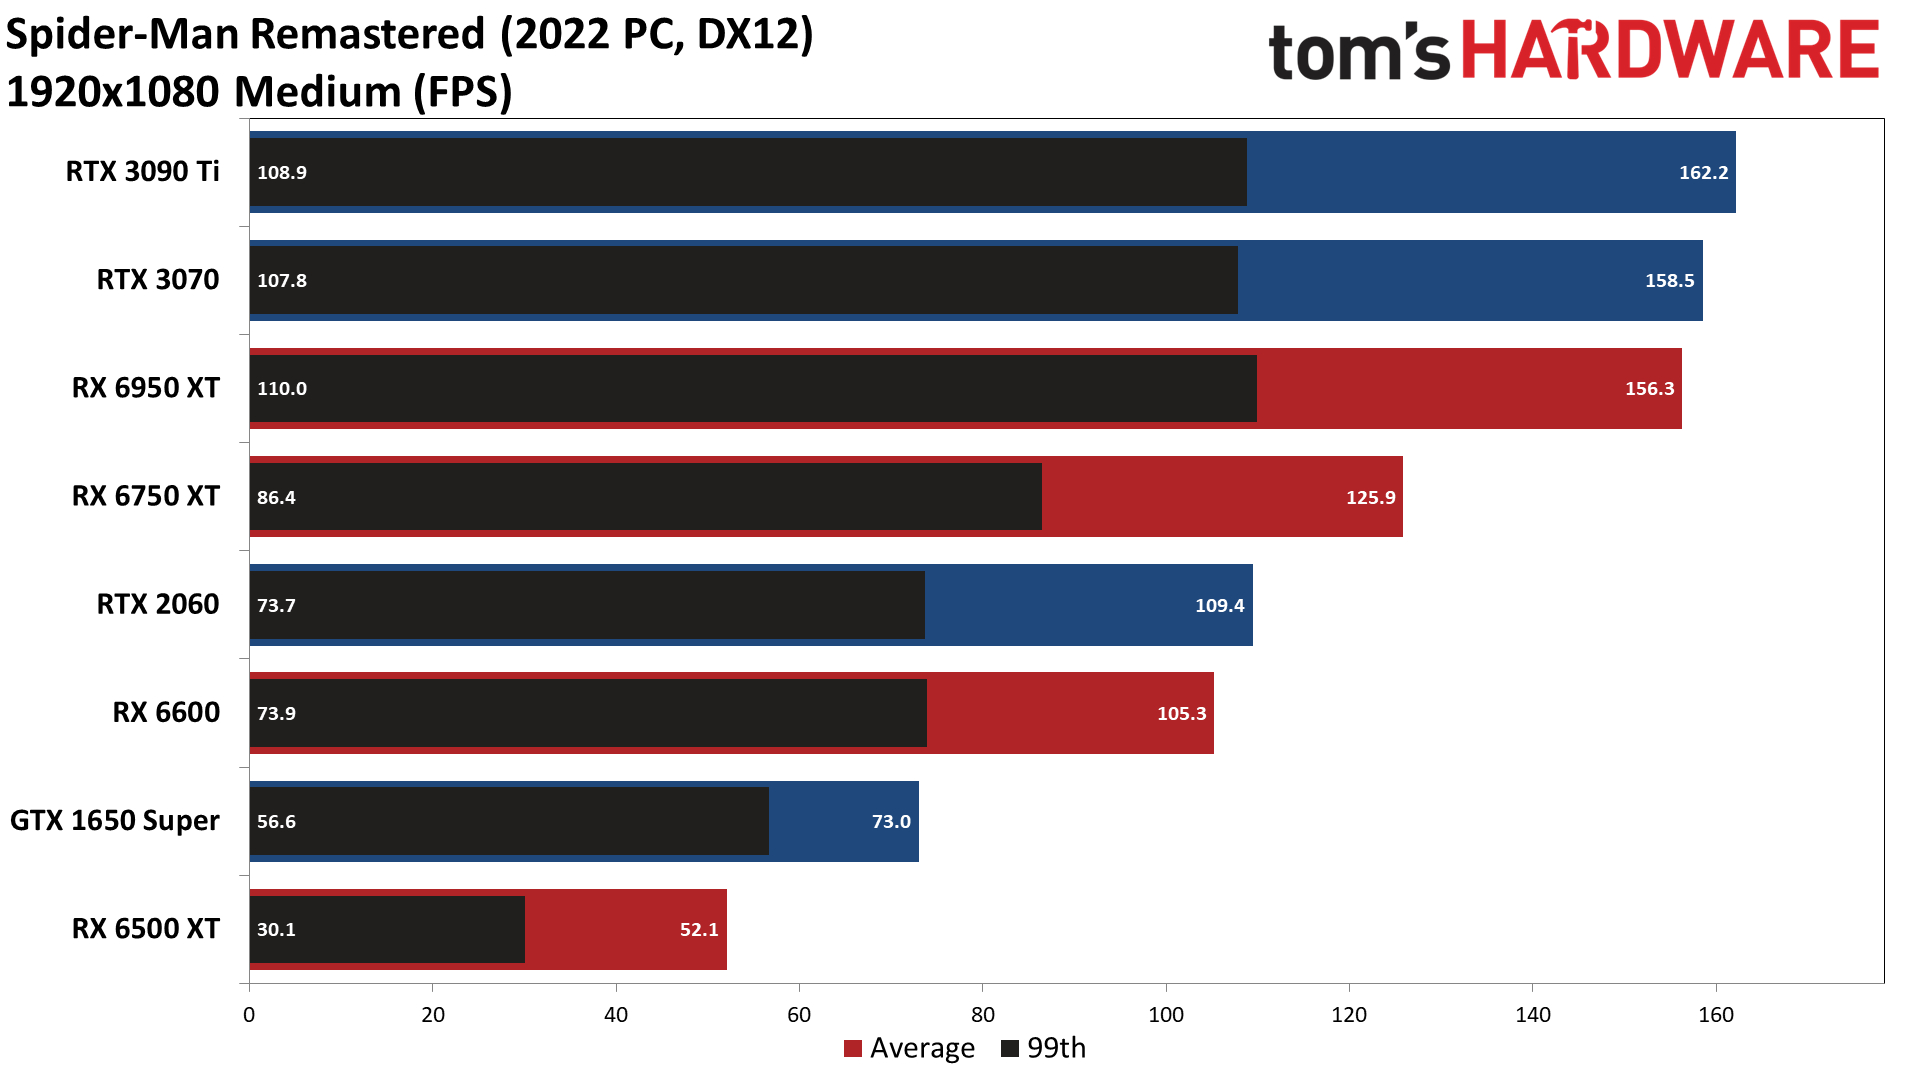 Spider-Man Remastered PC performance charts